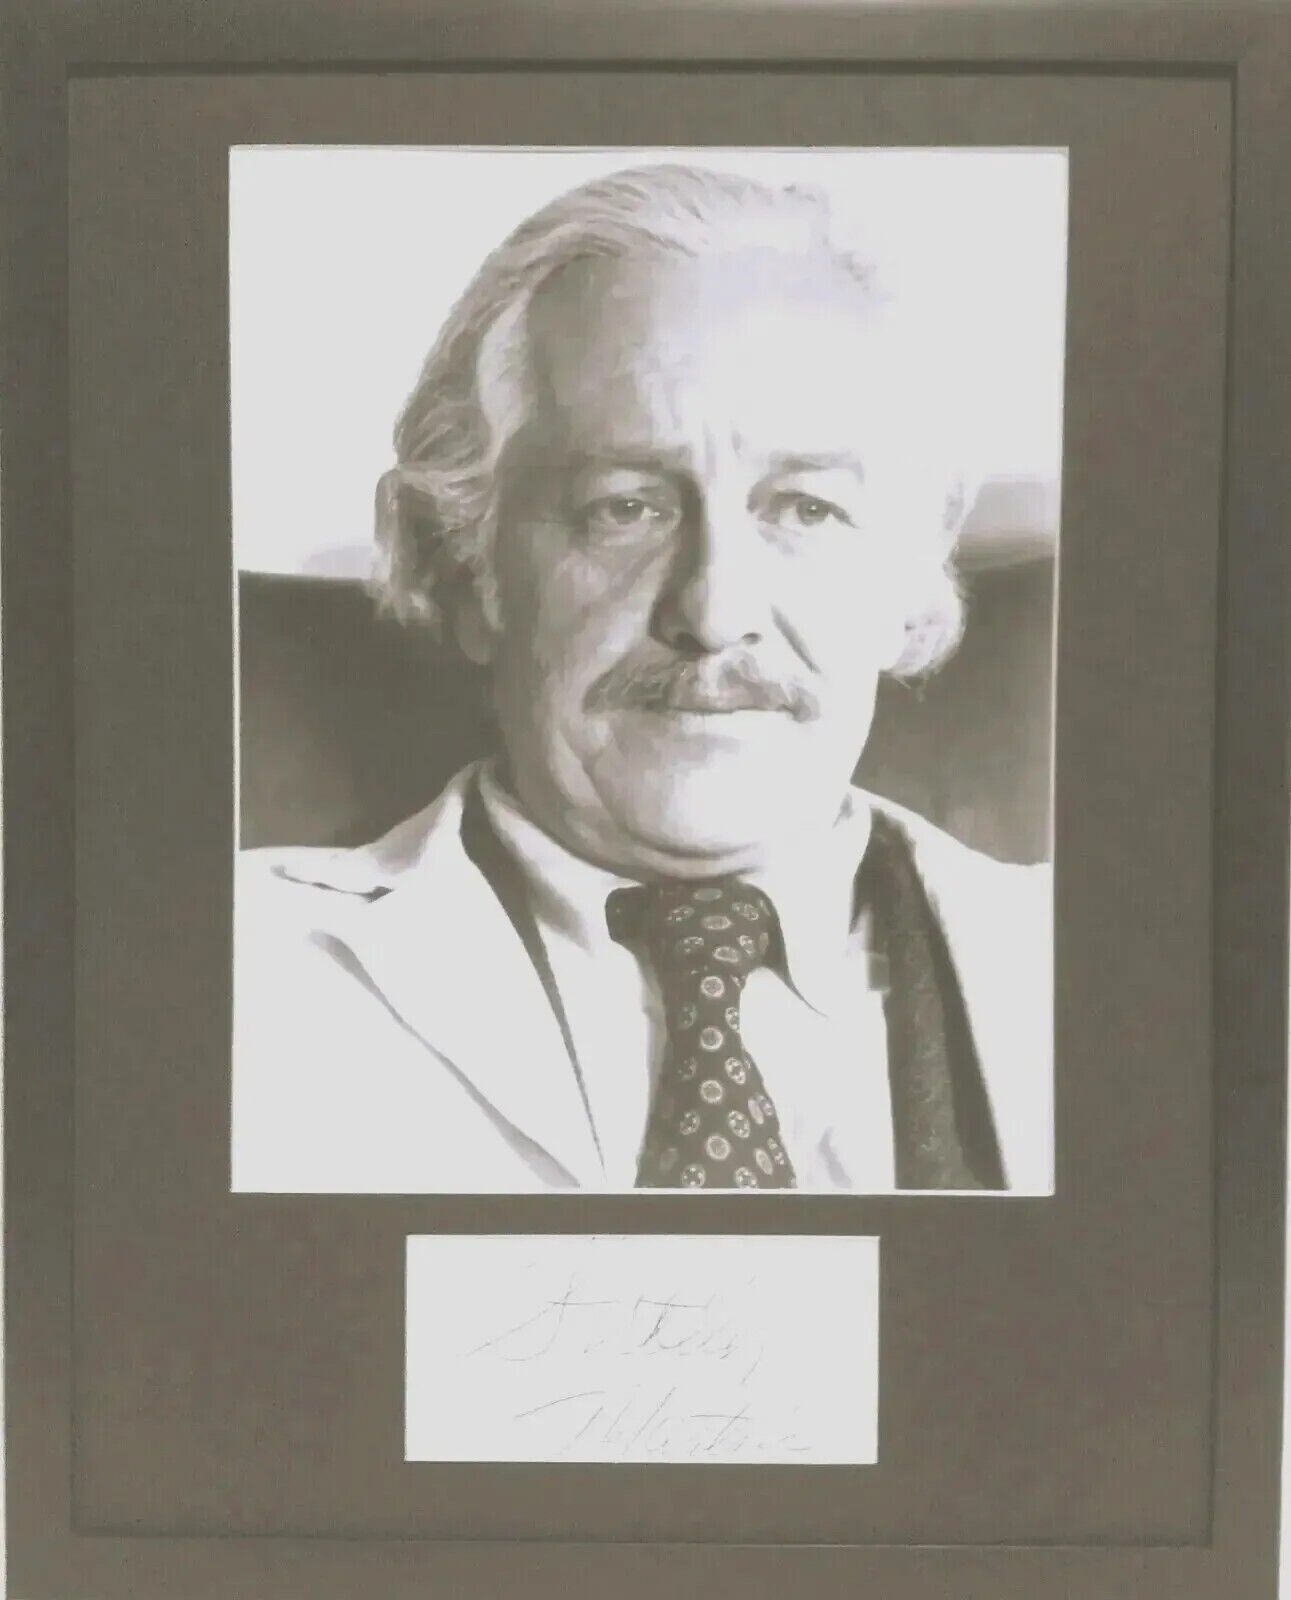 Strother Martin Signed Photo Display - JSA Certified with JSA COA